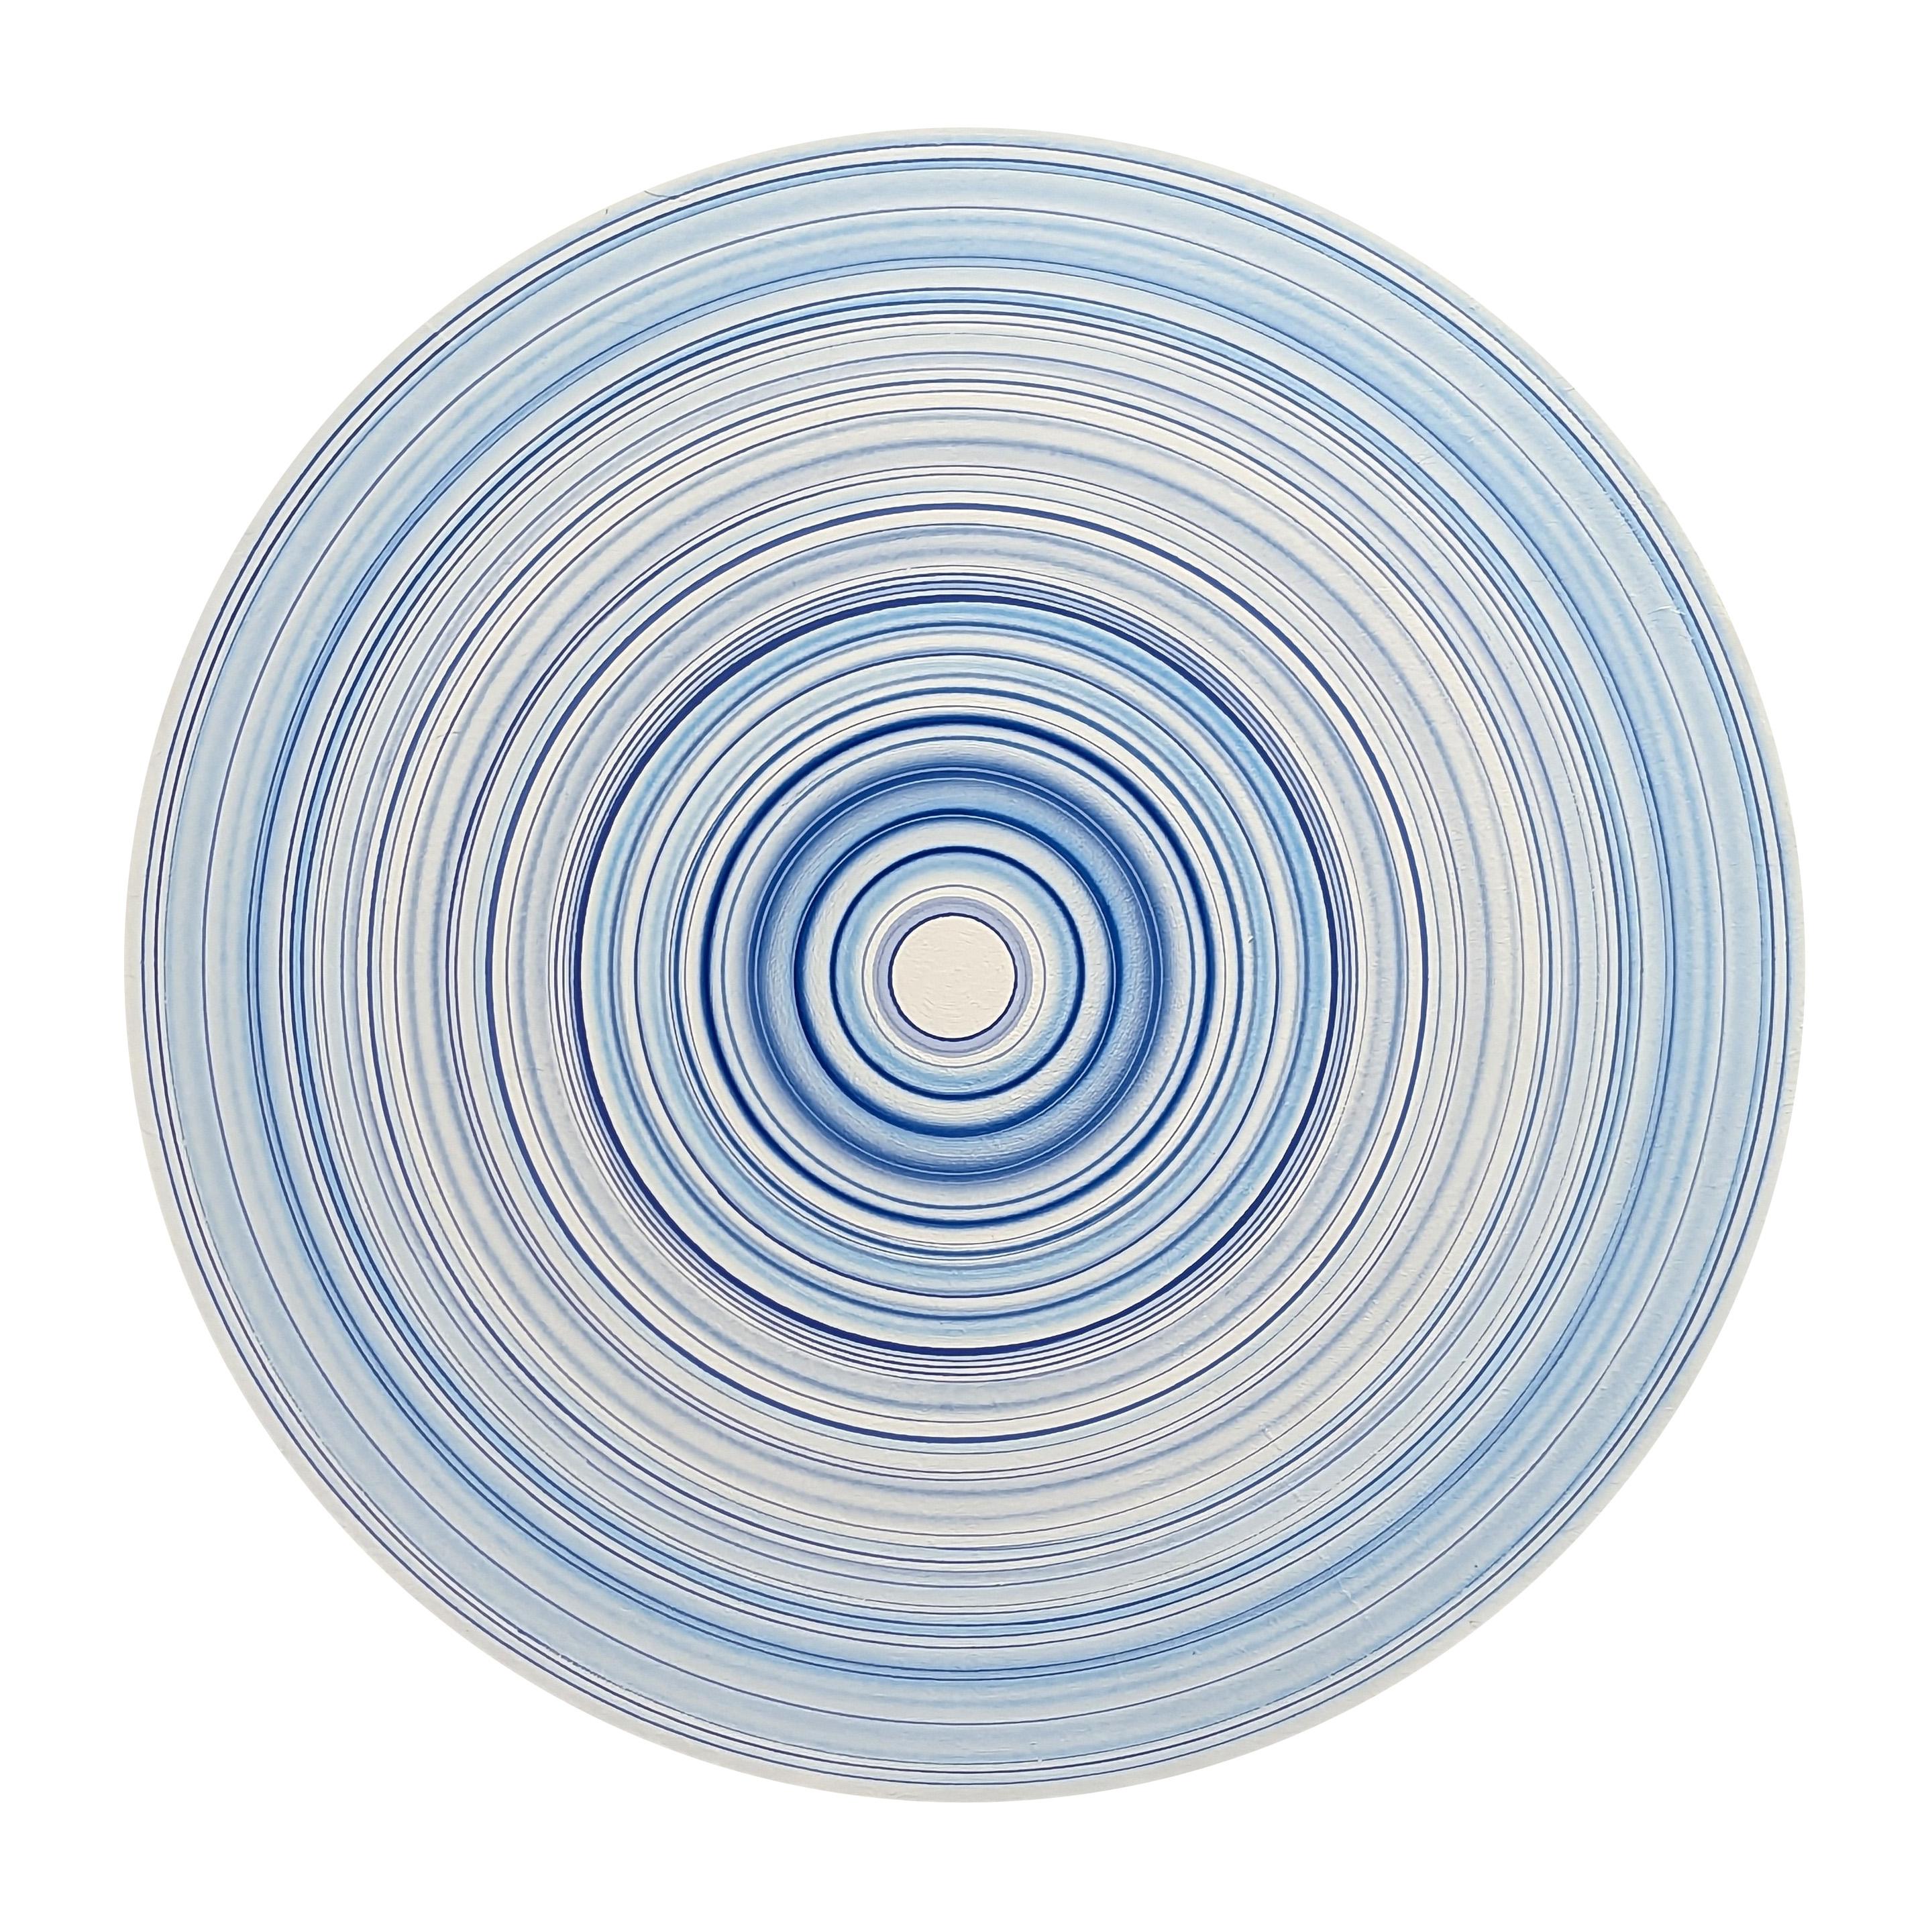 David Hardaker Abstract Painting – "Crazy Water" Contemporary Abstract Blue & White Concentric Circle Painting